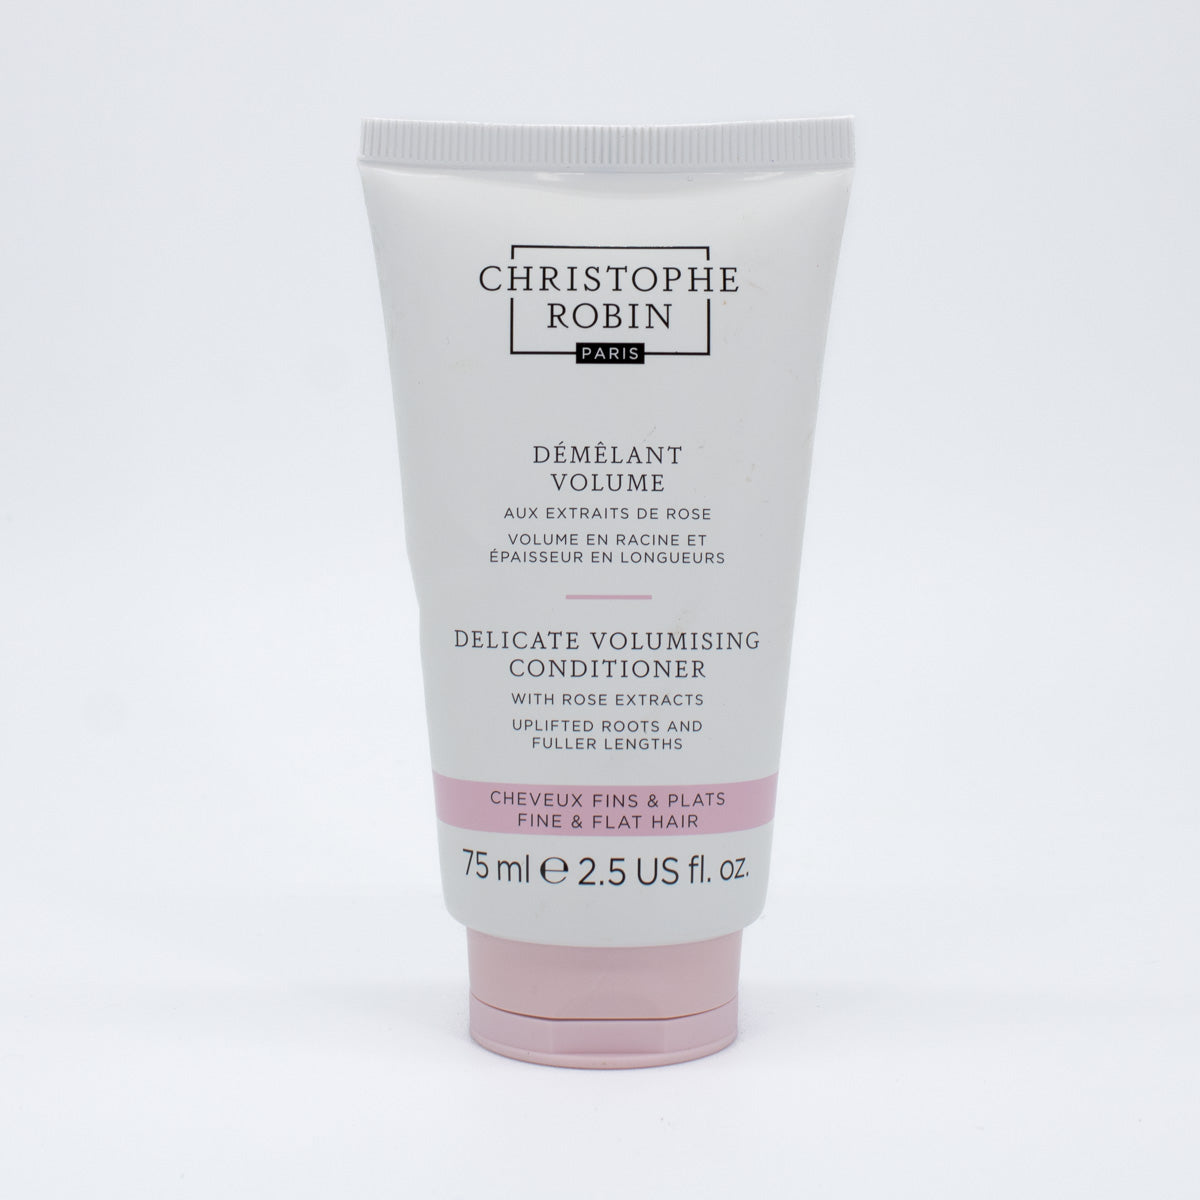 Christophe Robin Delicate Volumising Conditioner with Rose Extracts 2.5oz - Imperfect Container